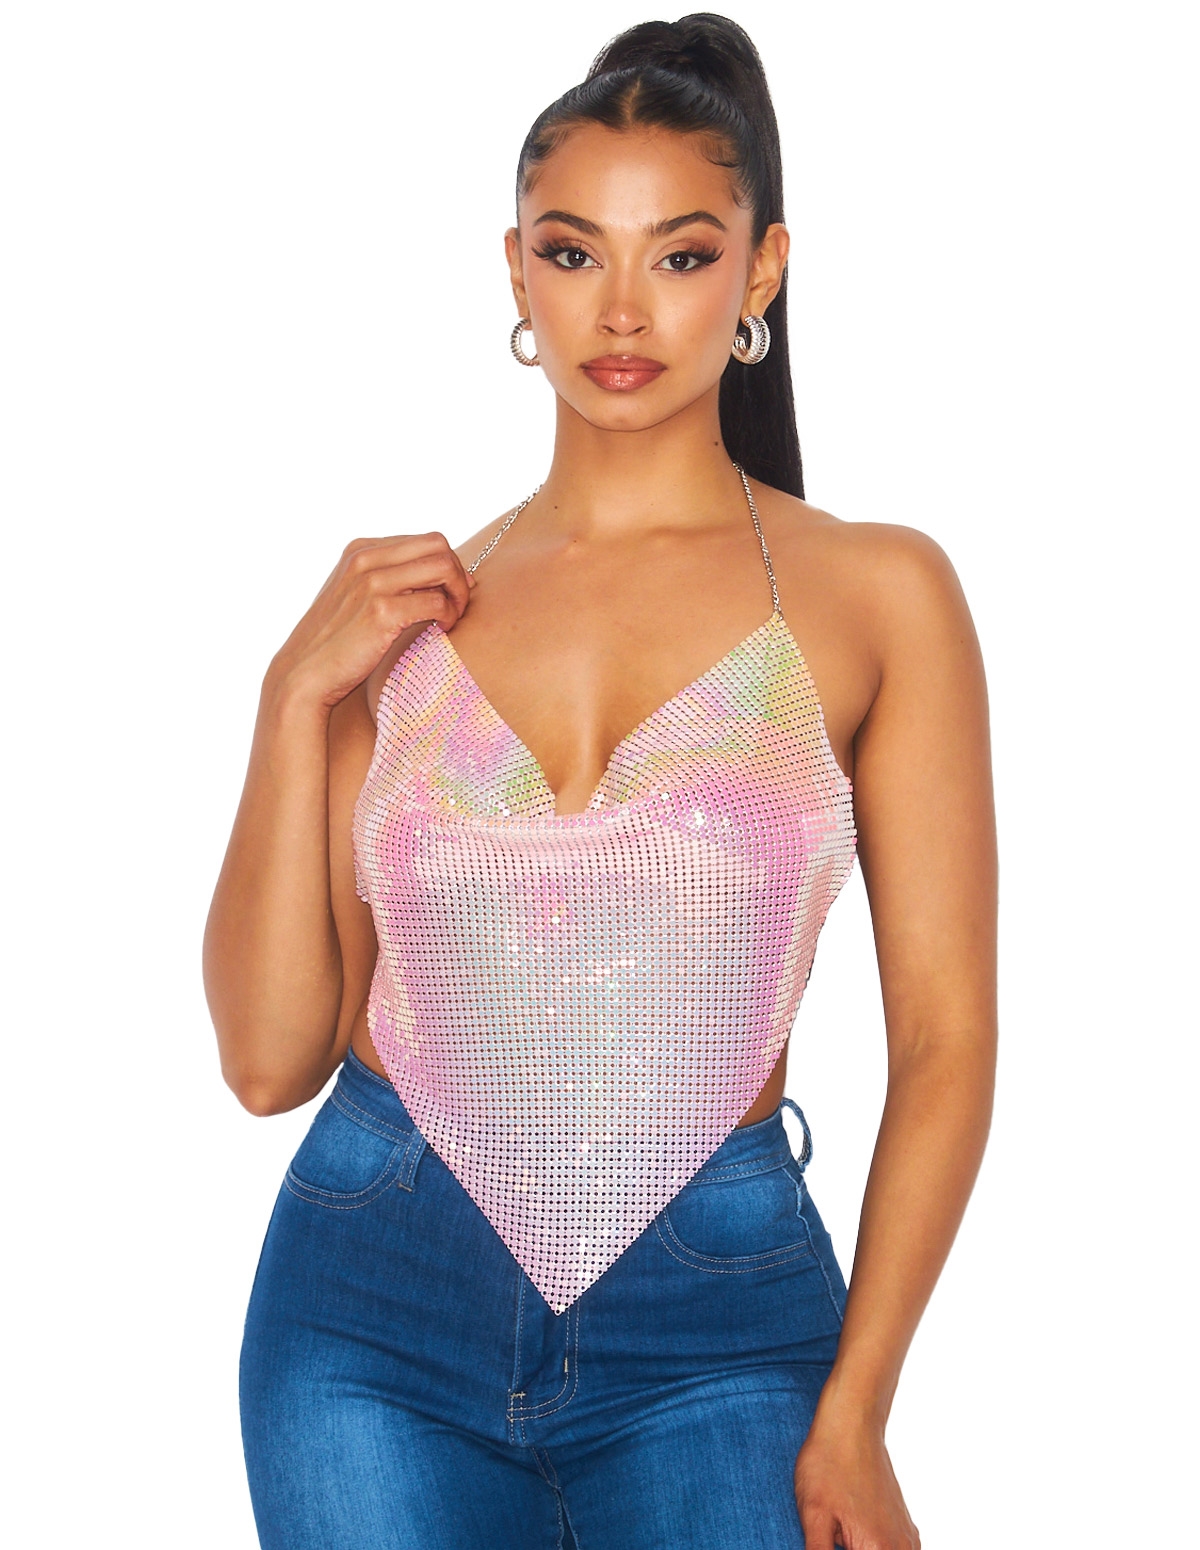 https://images.loverslane.com/images/products/1_244415_ZM_PK_HOLOGRAPHIC-CHAINMAIL-TOP.jpg